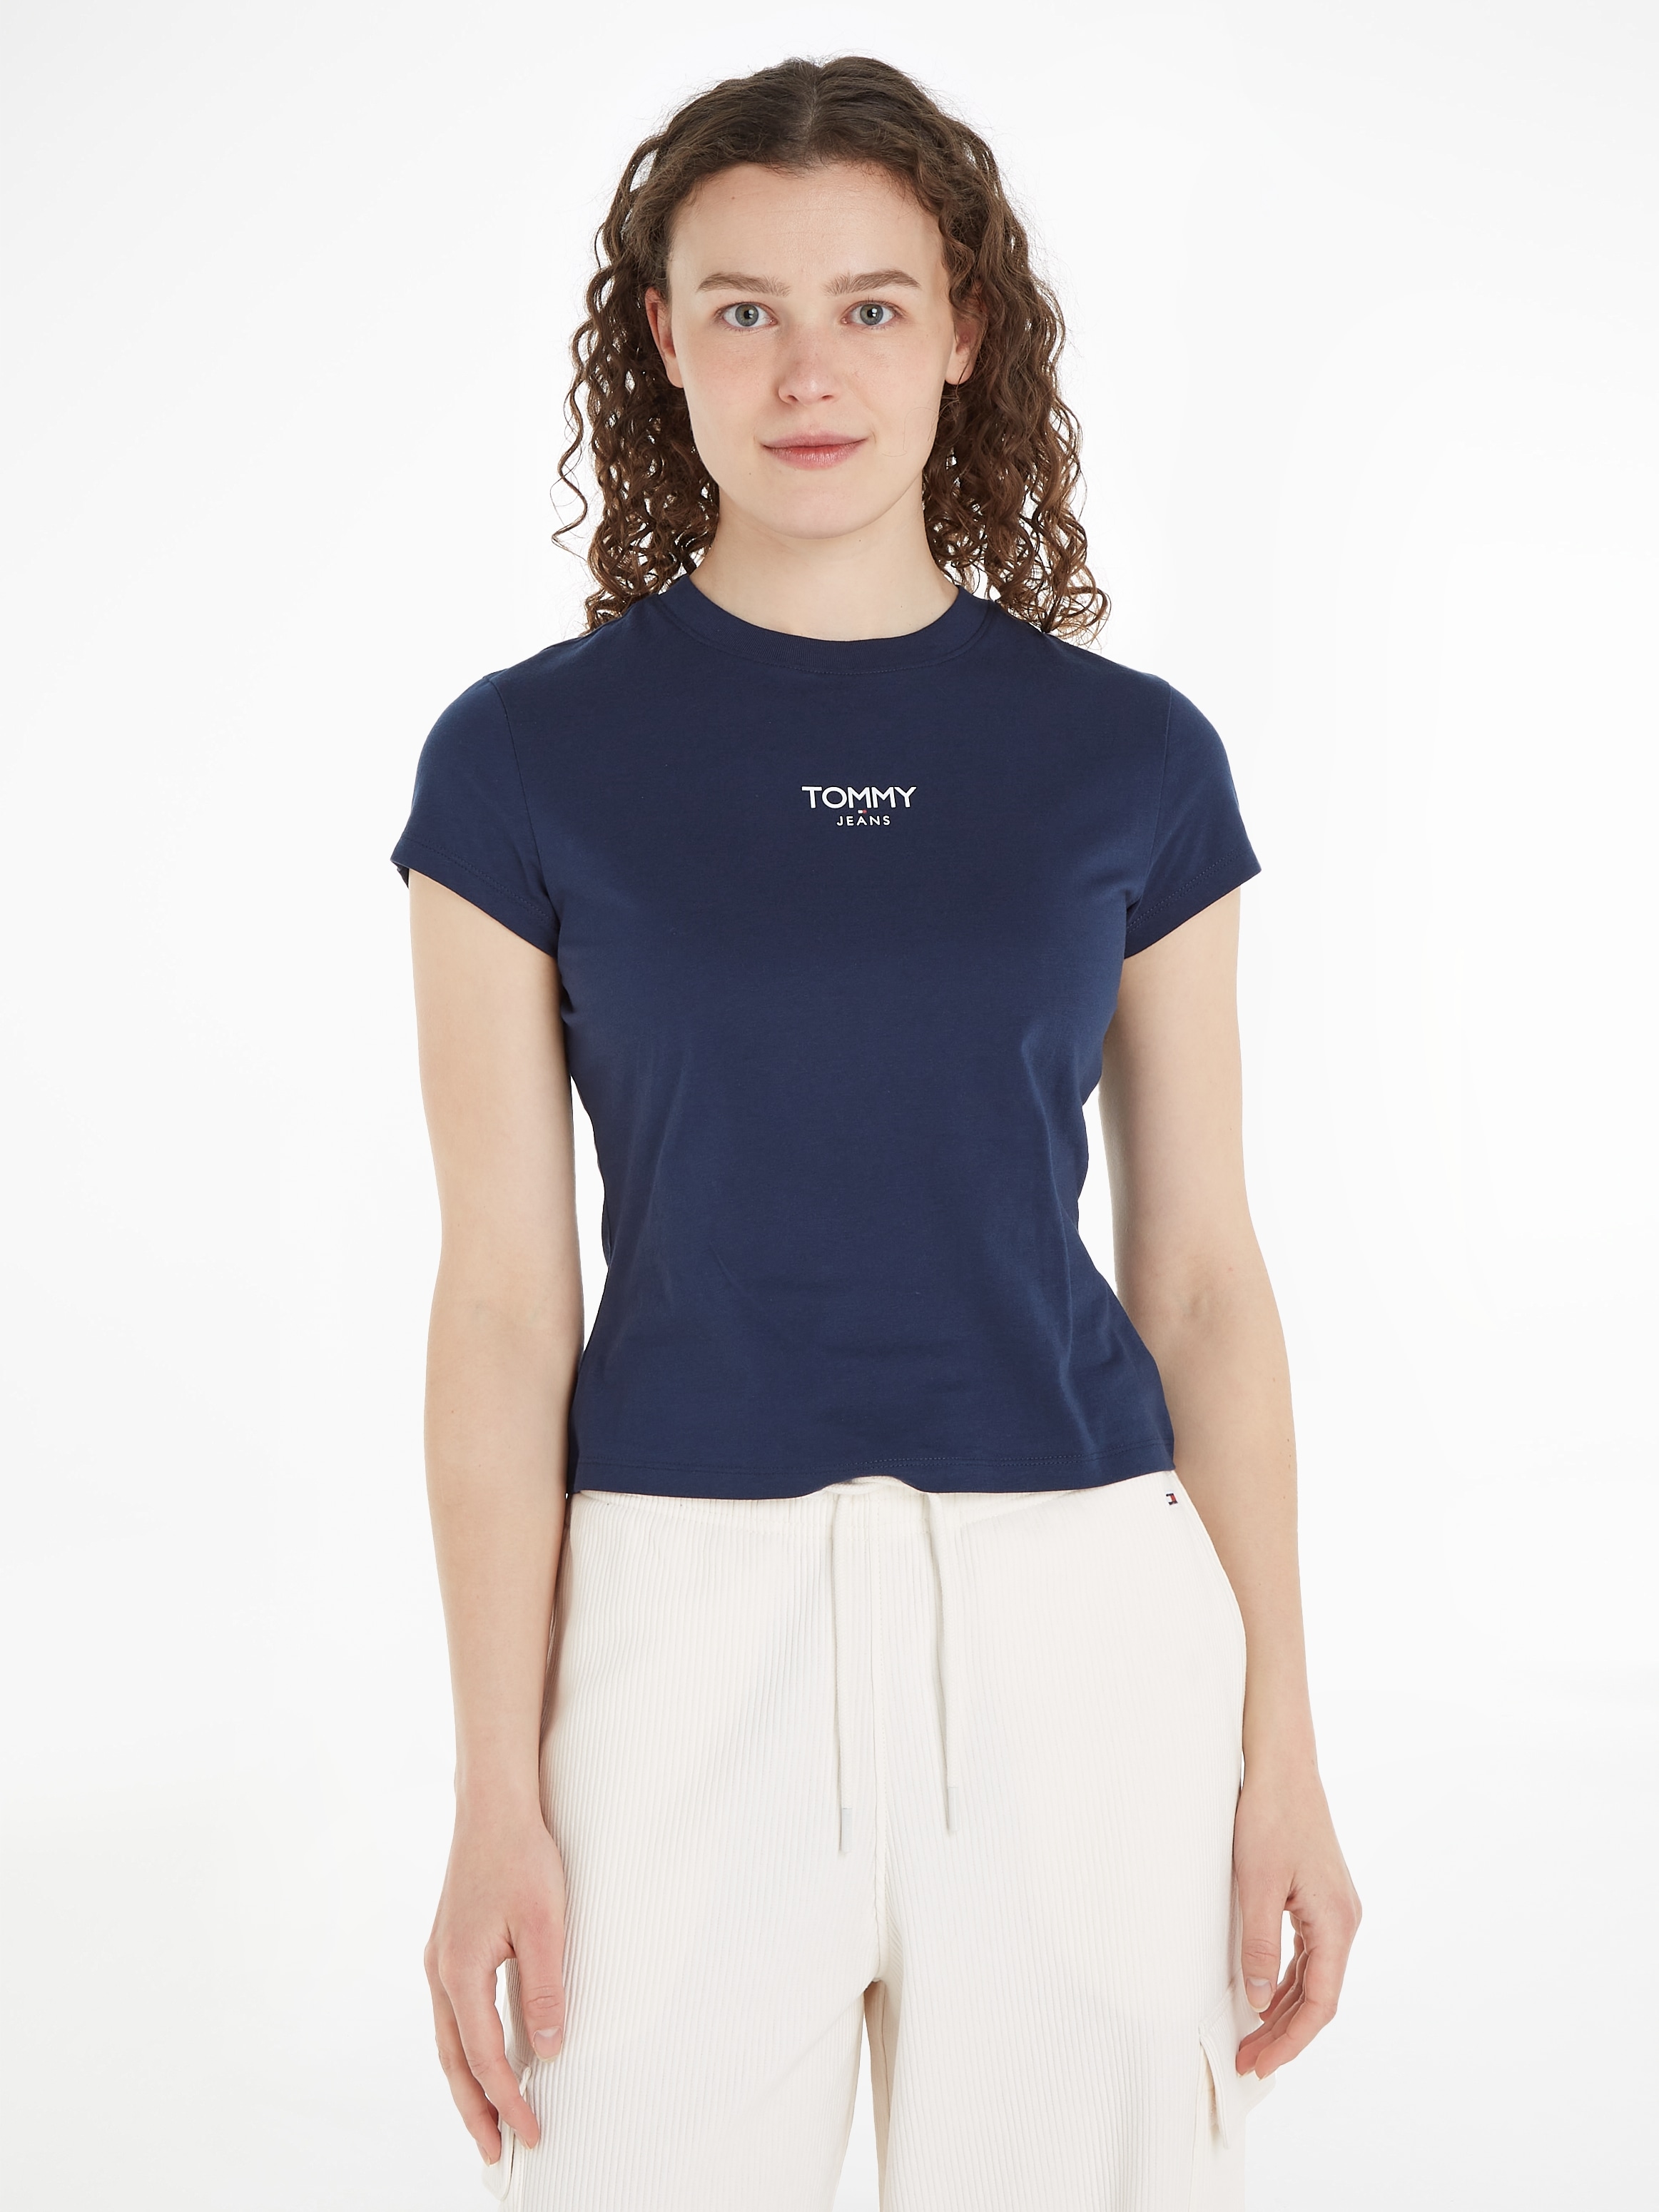 Tommy Jeans T-Shirt BBY 1 Jeans OTTOversand mit SS«, bei Tommy »TJW Logo LOGO ESSENTIAL